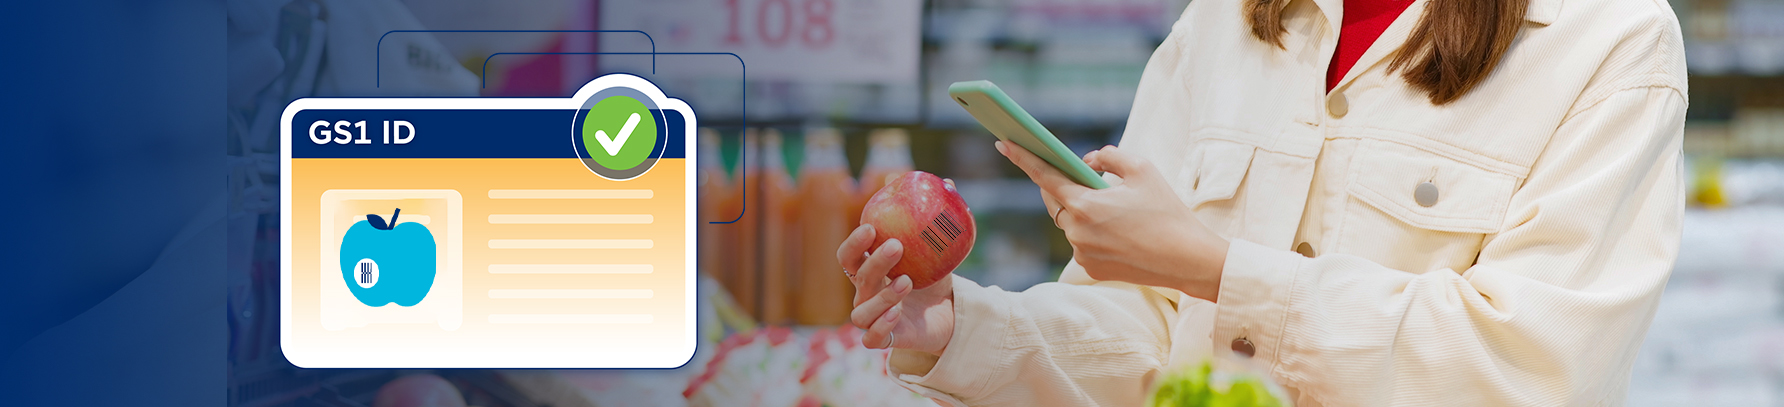 How 2D Barcodes are Transforming the Way You Eat, Shop, and Live!